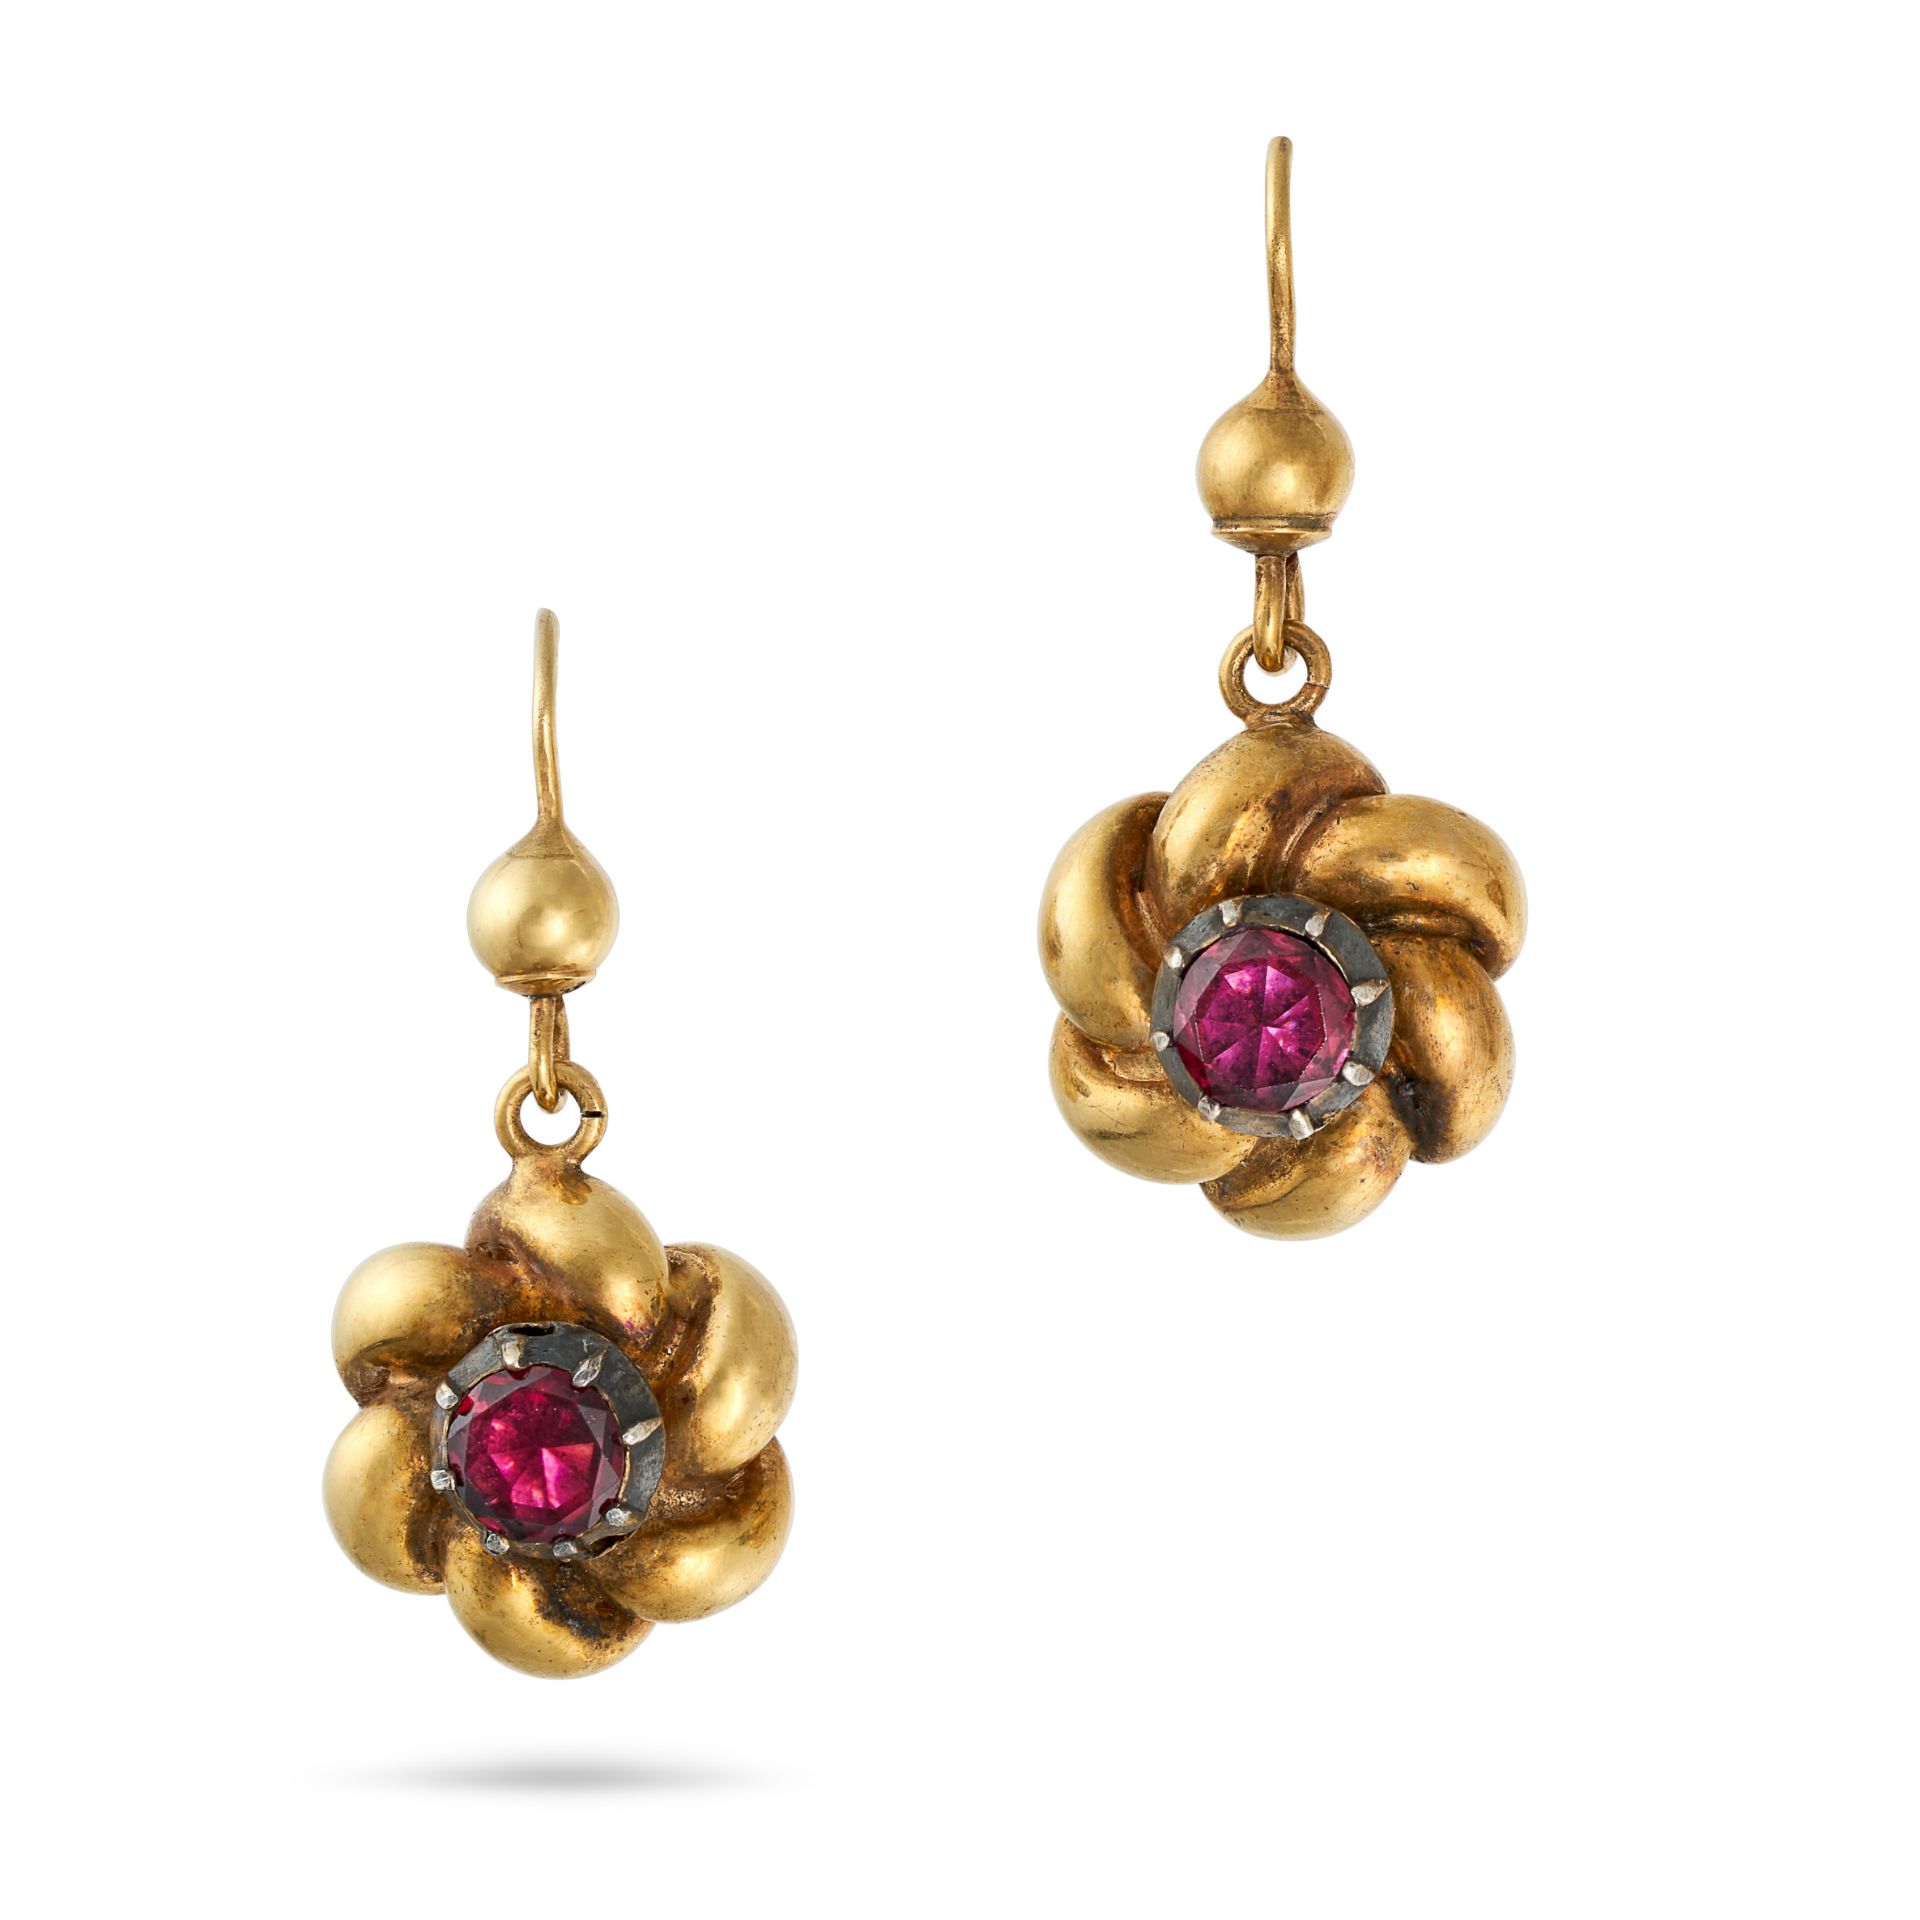 A PAIR OF ANTIQUE VICTORIAN GARNET EARRINGS in yellow gold, each earring set with a faceted garne...